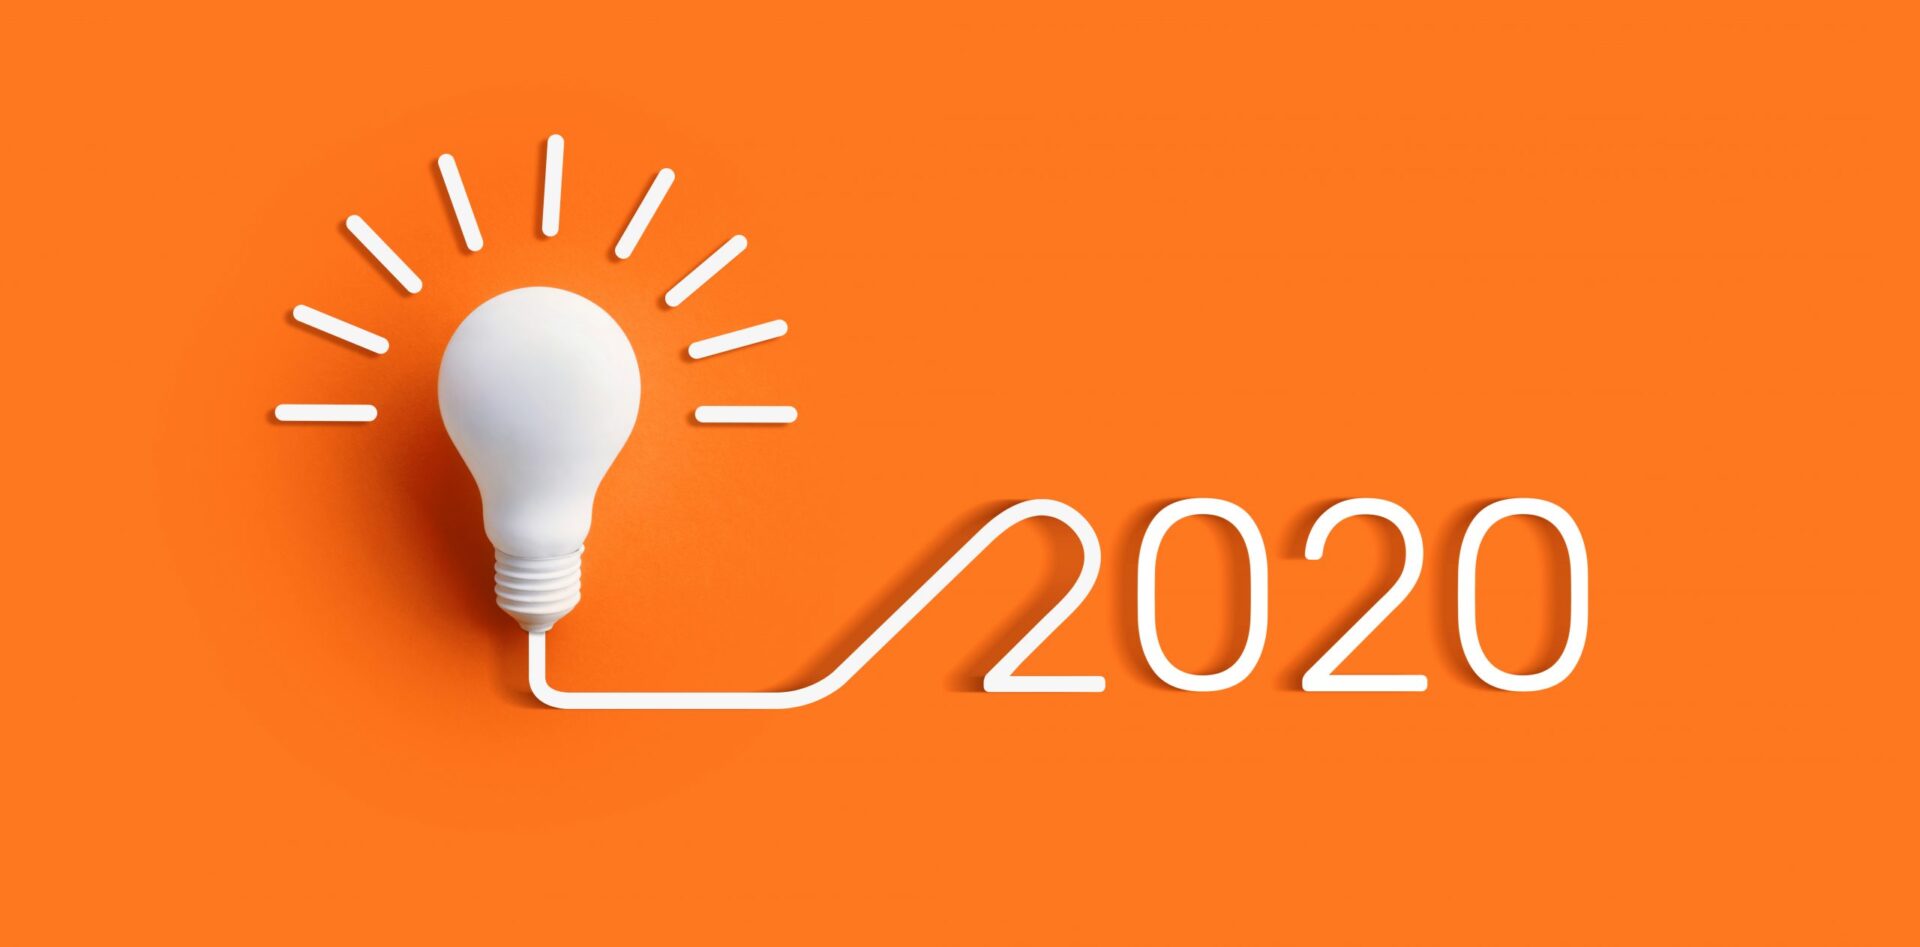 Photo of 2020 and a light bulb beside it